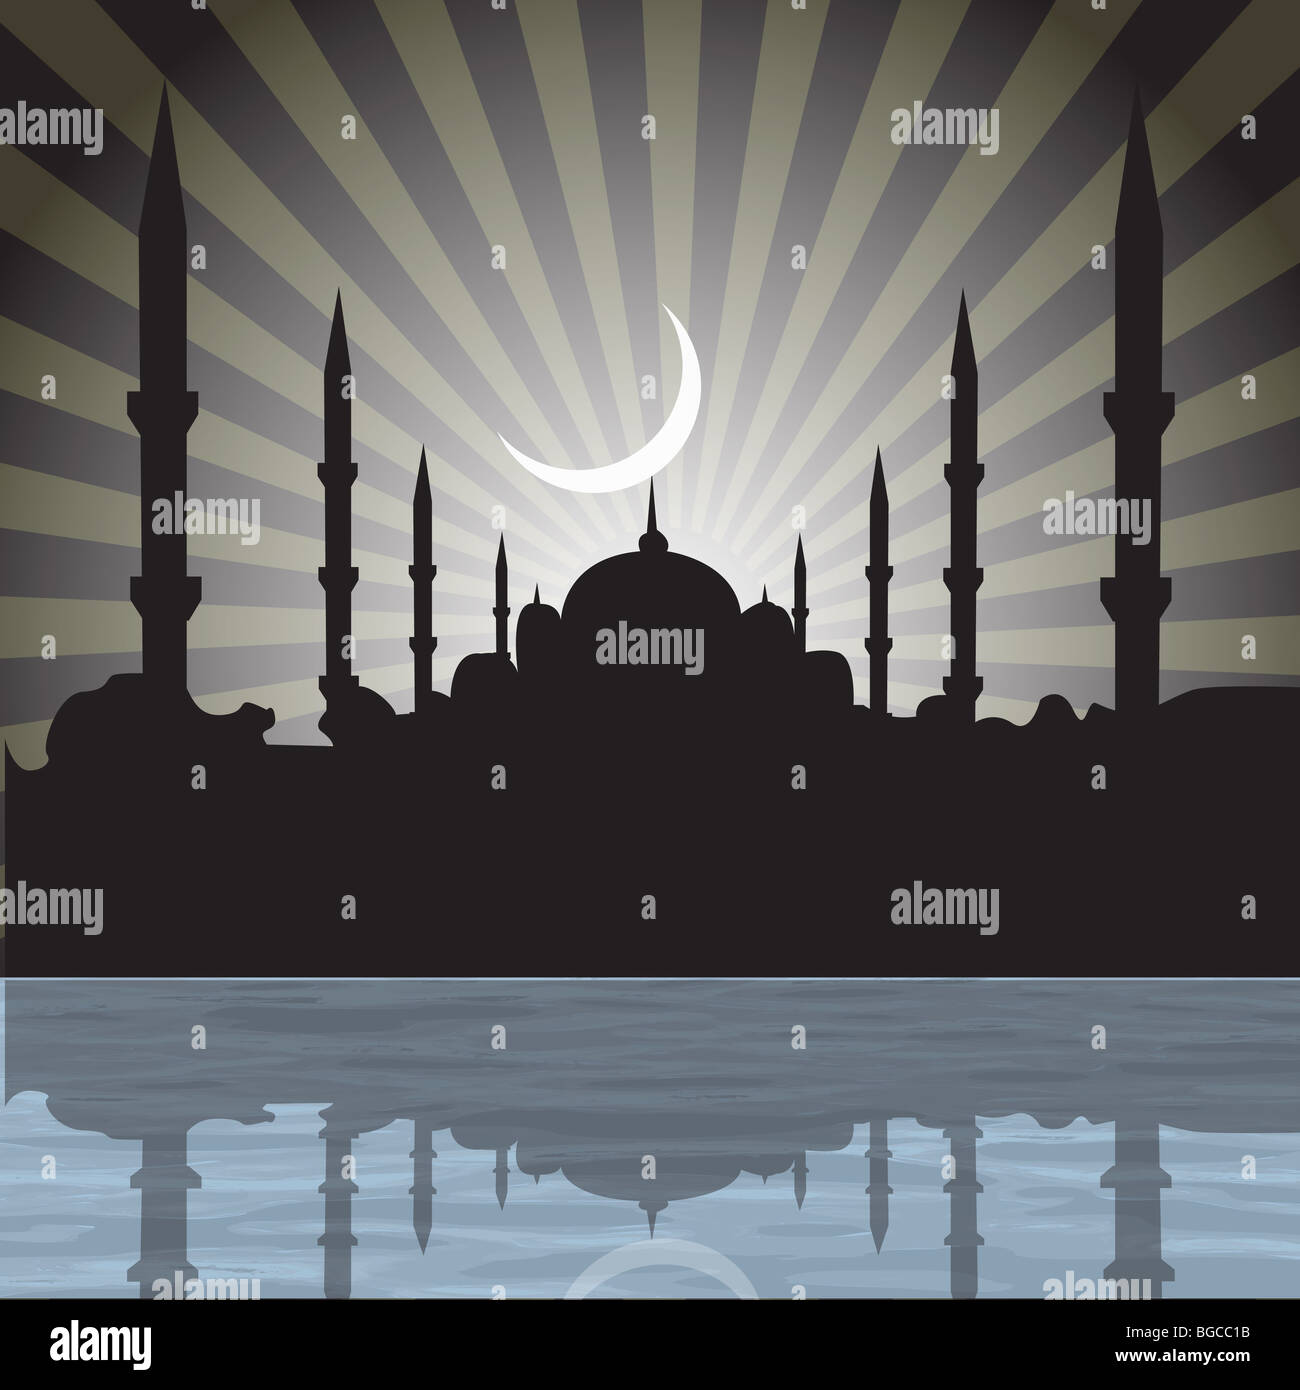 silhouette of a mosque with rays, moon background Stock Photo